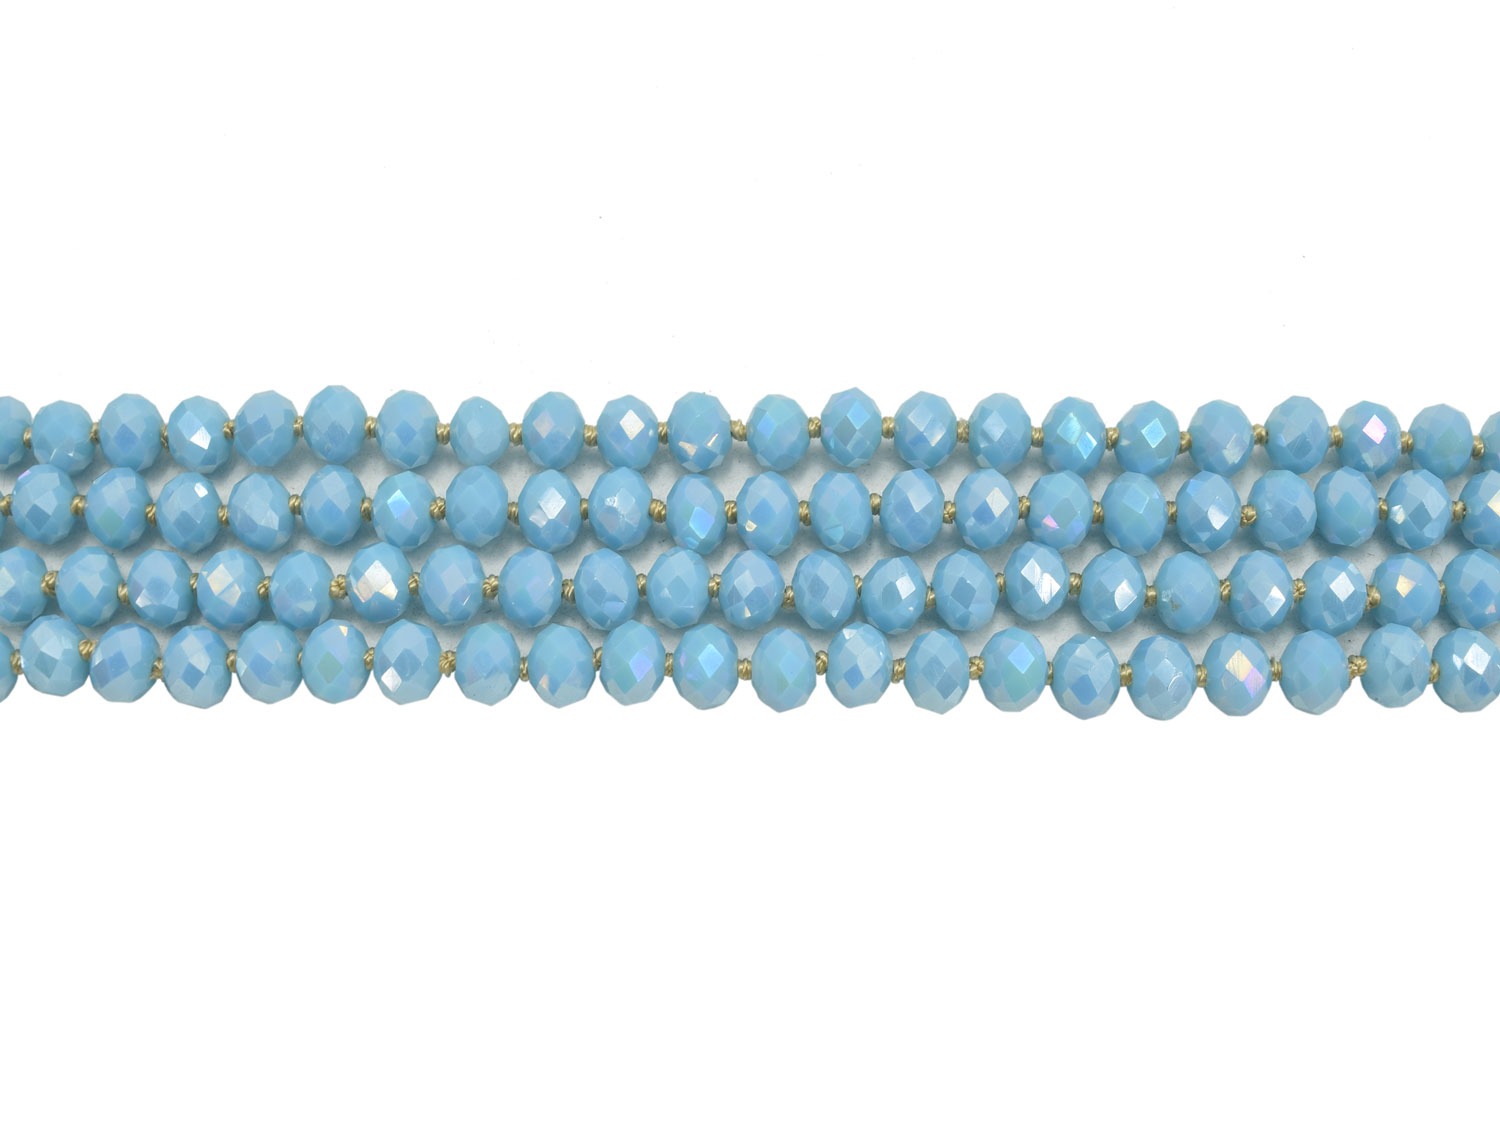 Download Light blue full color knotted light coffee line (60 inches long) - Beads Source